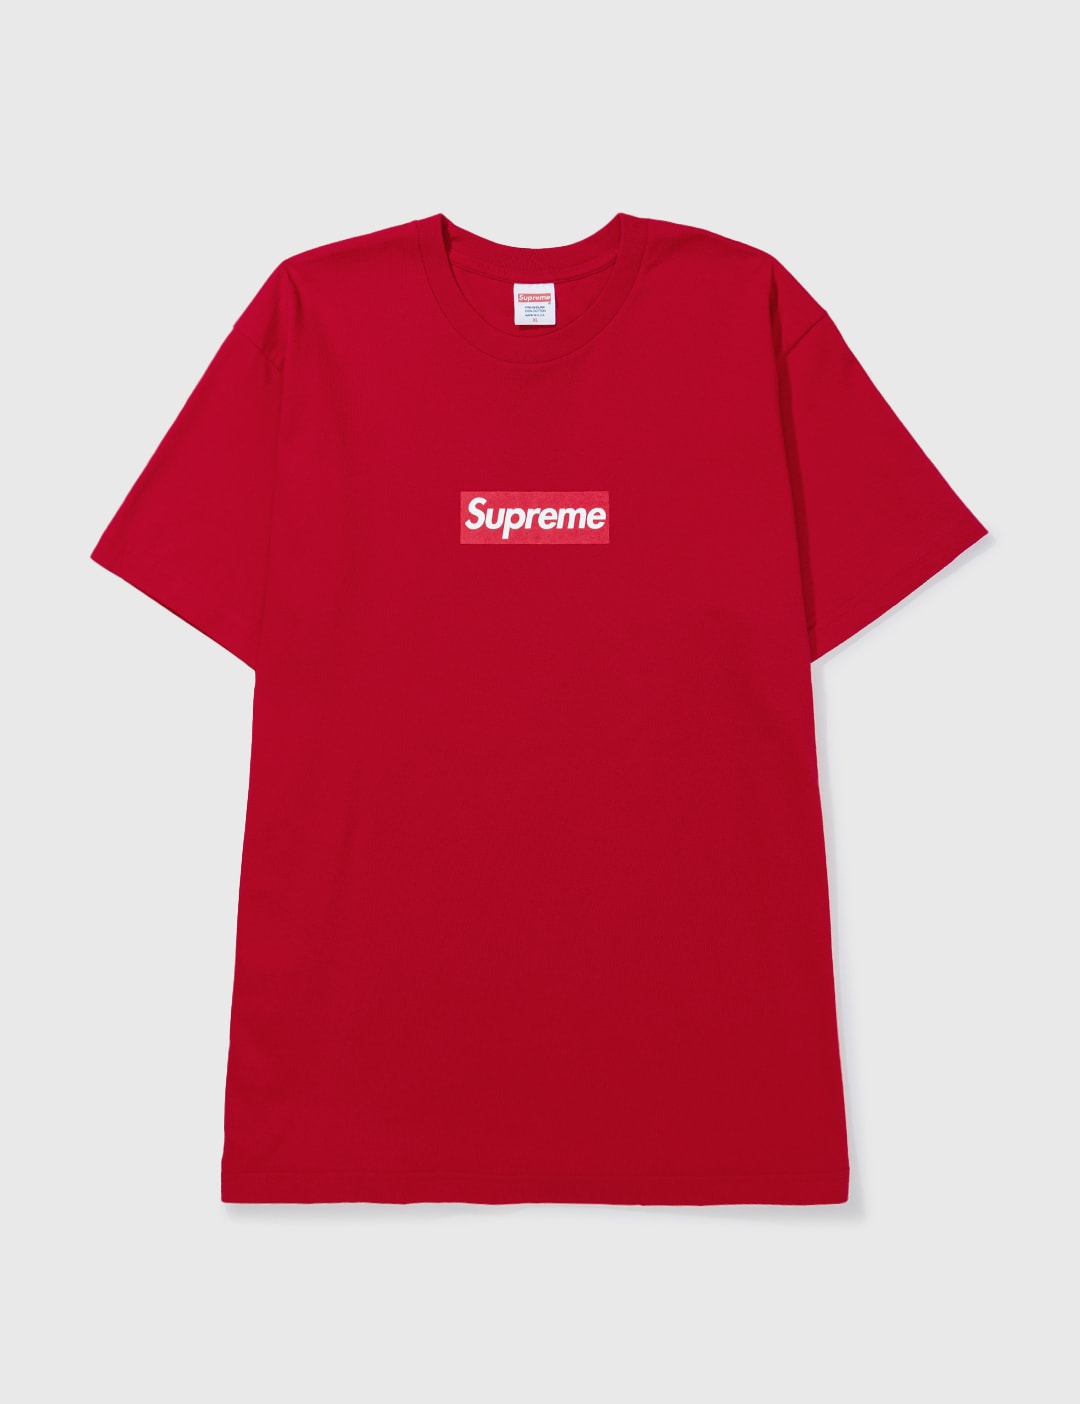 Supreme - 20TH ANNIVERSARY LOGO T-shirt | HBX Globally Curated Fashion and Lifestyle